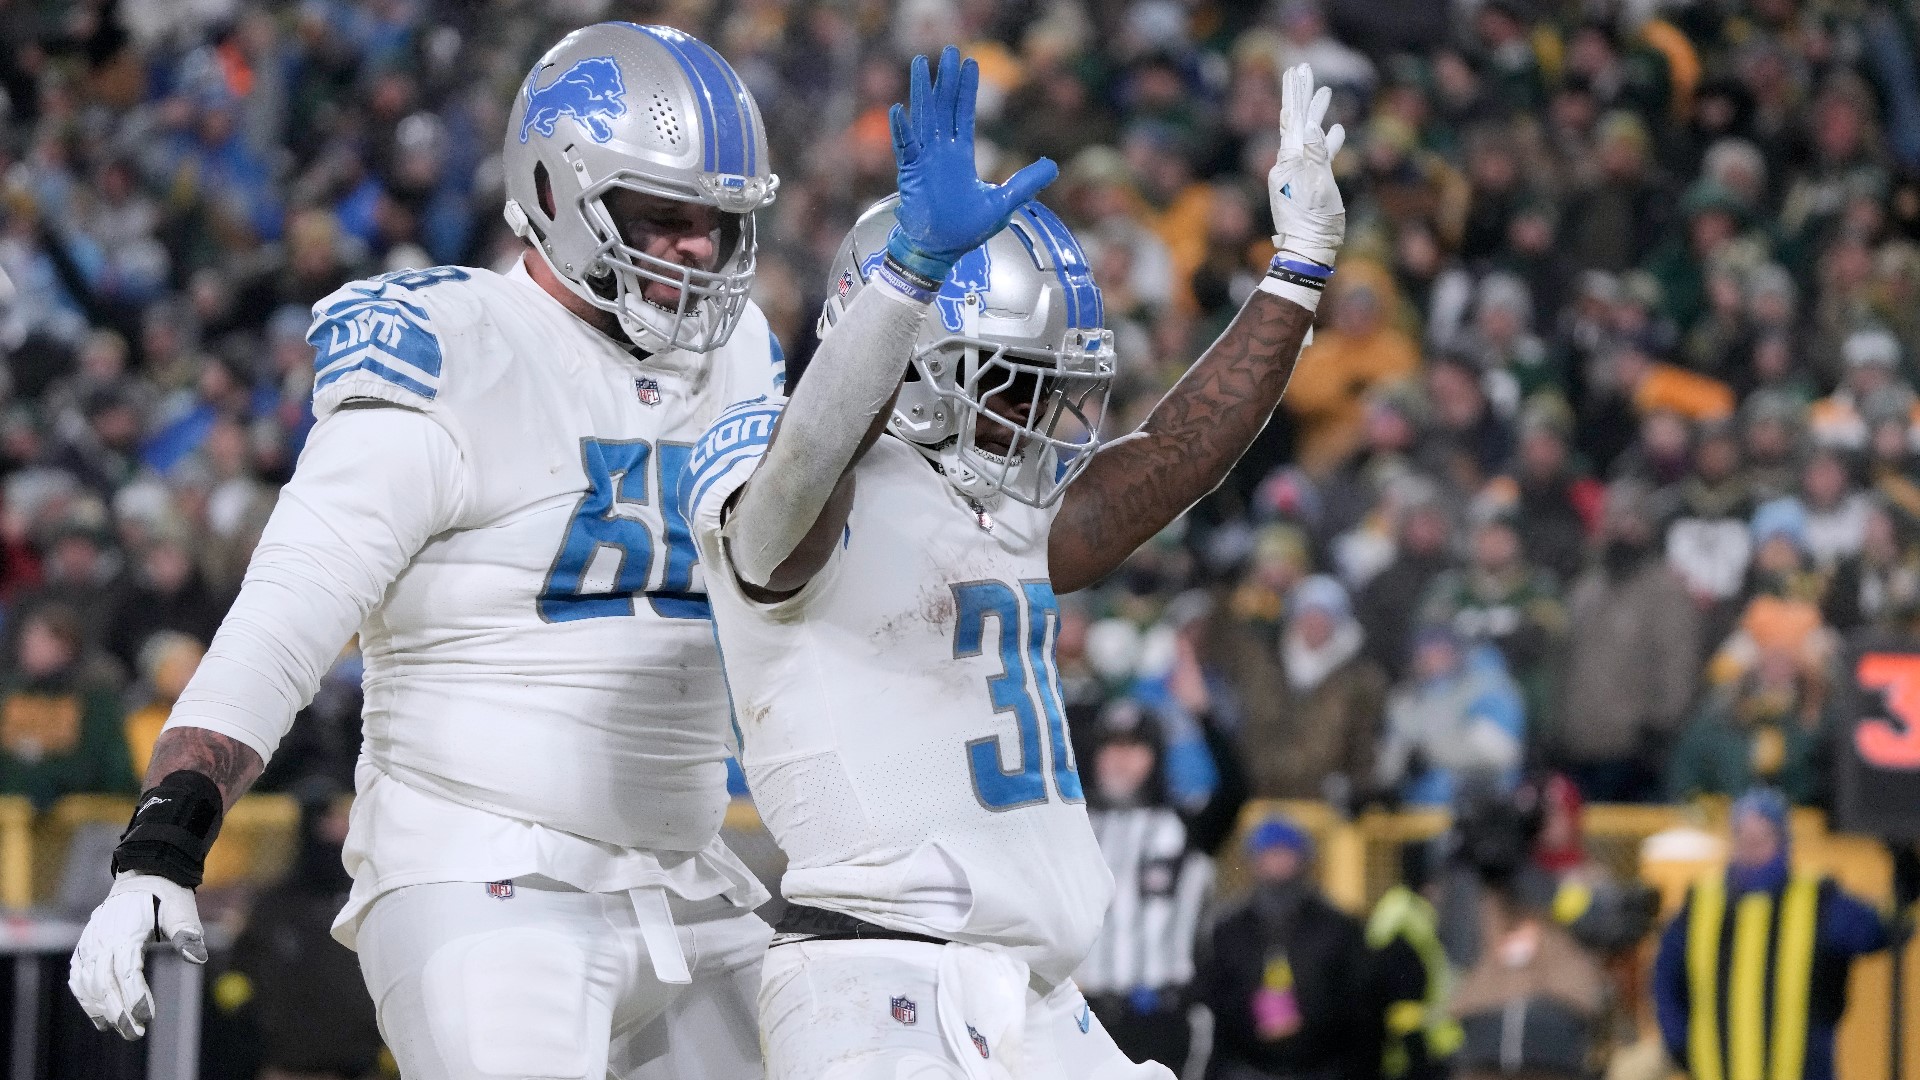 The Lions 2022 season comes to an end with the team turning around after a 1-6 start to finish above .500 at 9-8 overall following the 20-16 win over the Packers.